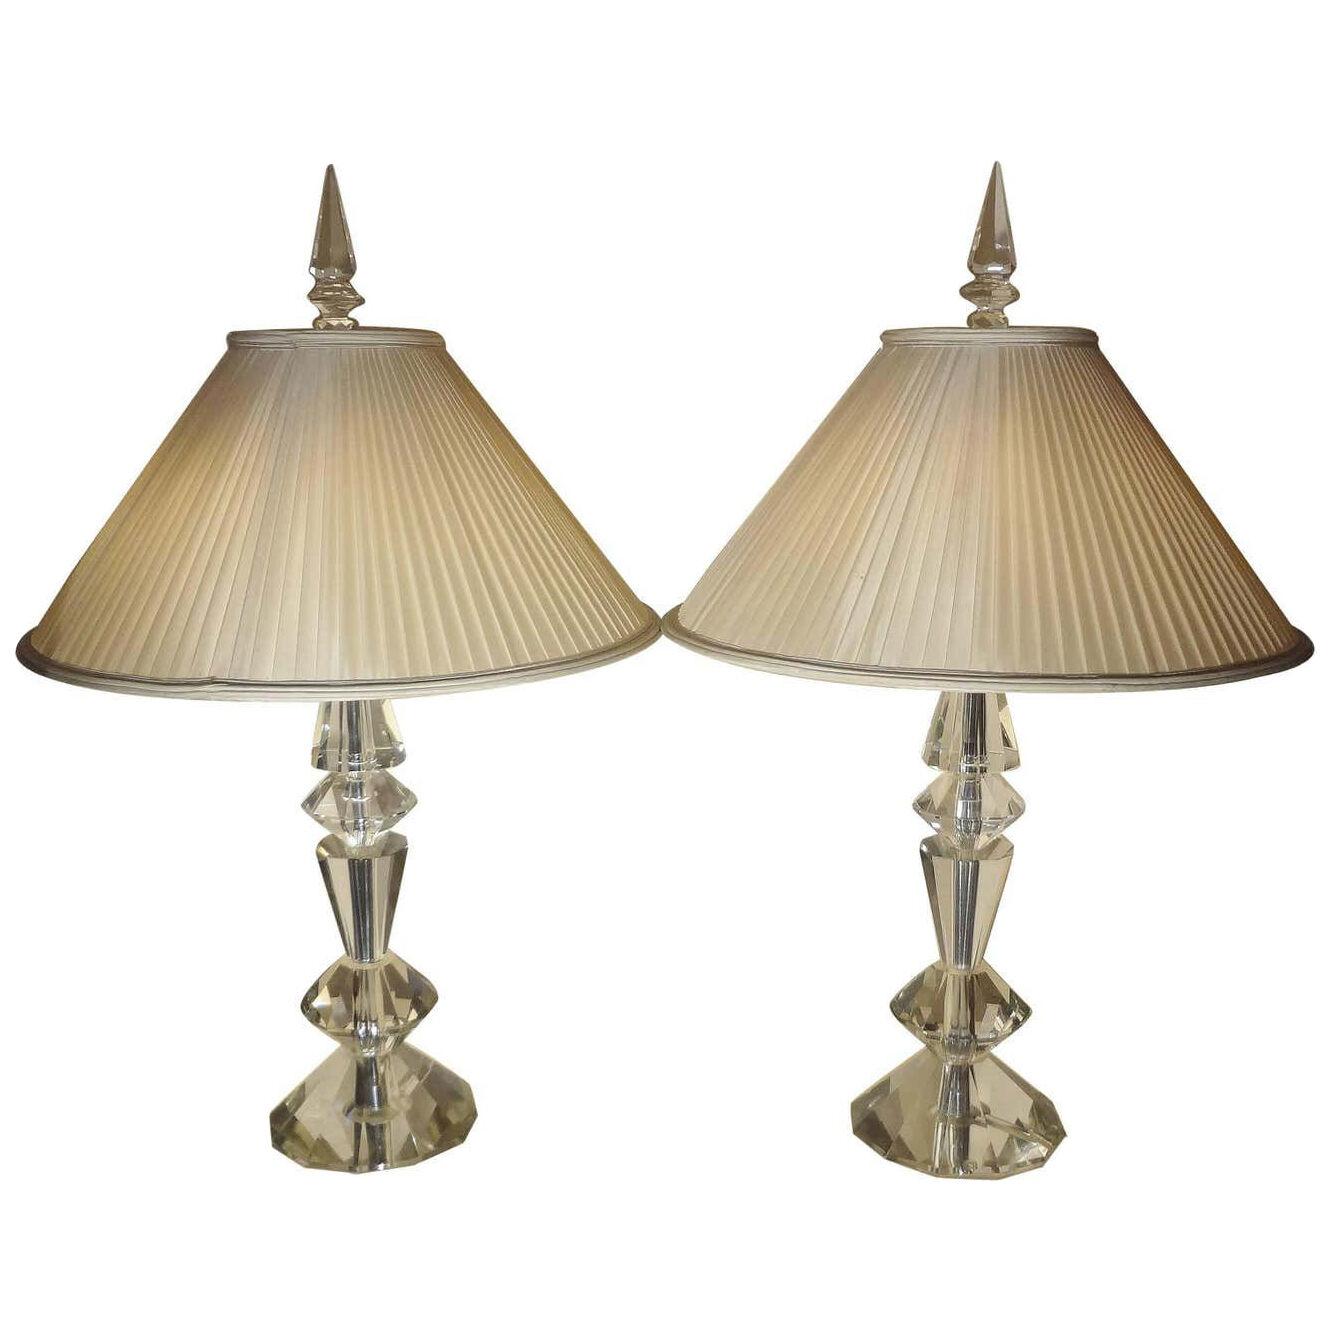 Spectacular Pair of Glass Table Lamps, France, 1940s